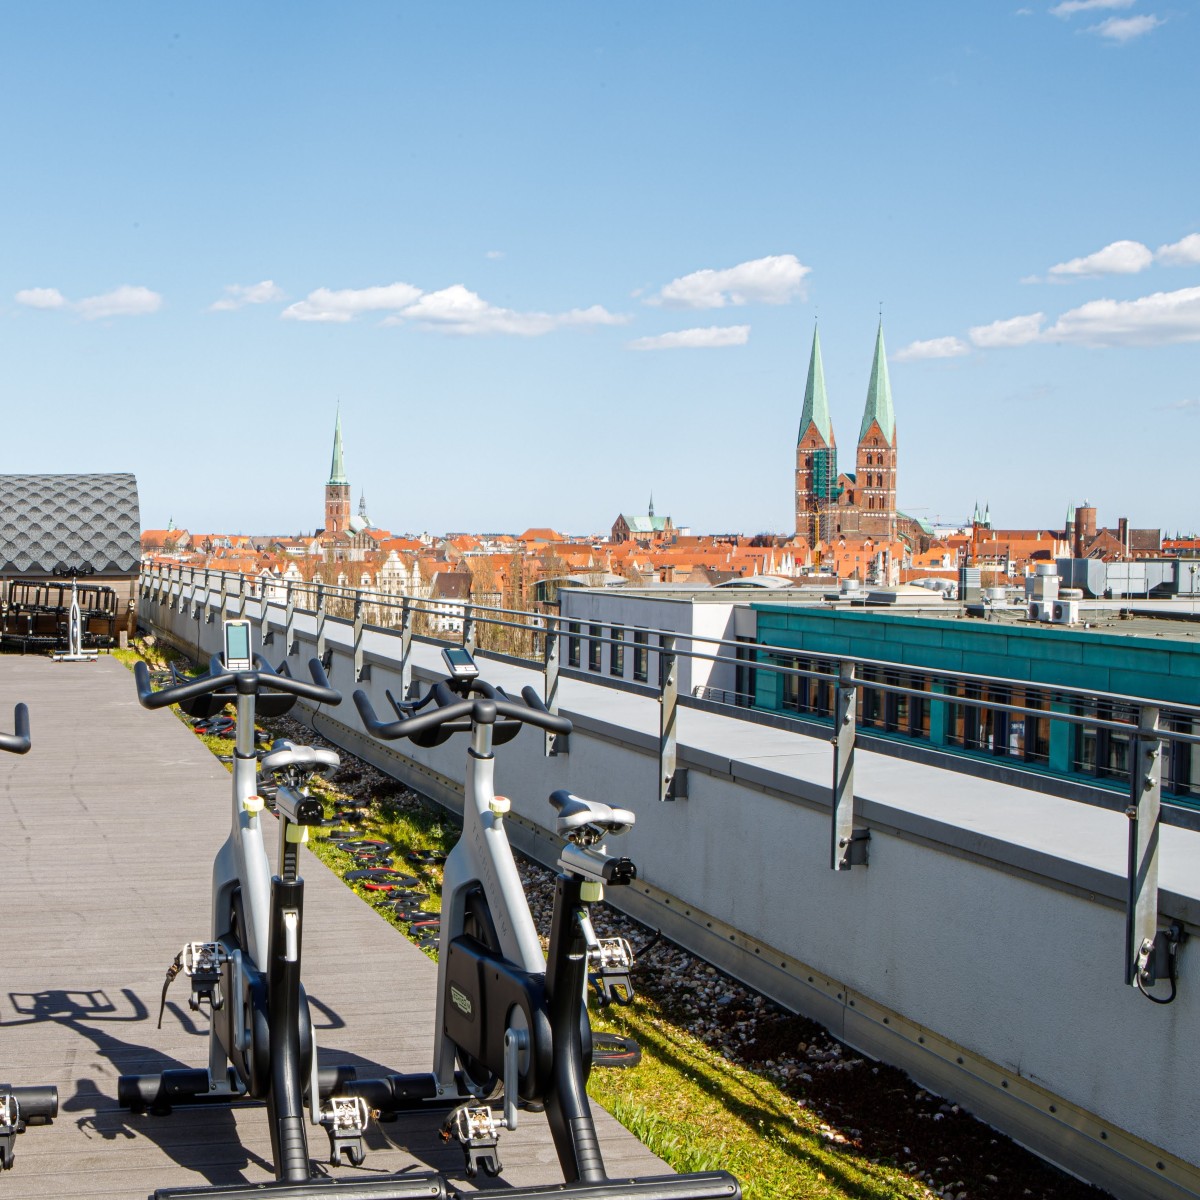 Exercise bikes on rooftop terrace overlooking twin towers of the St. Marien church in the historic city of Luebeck, Germany